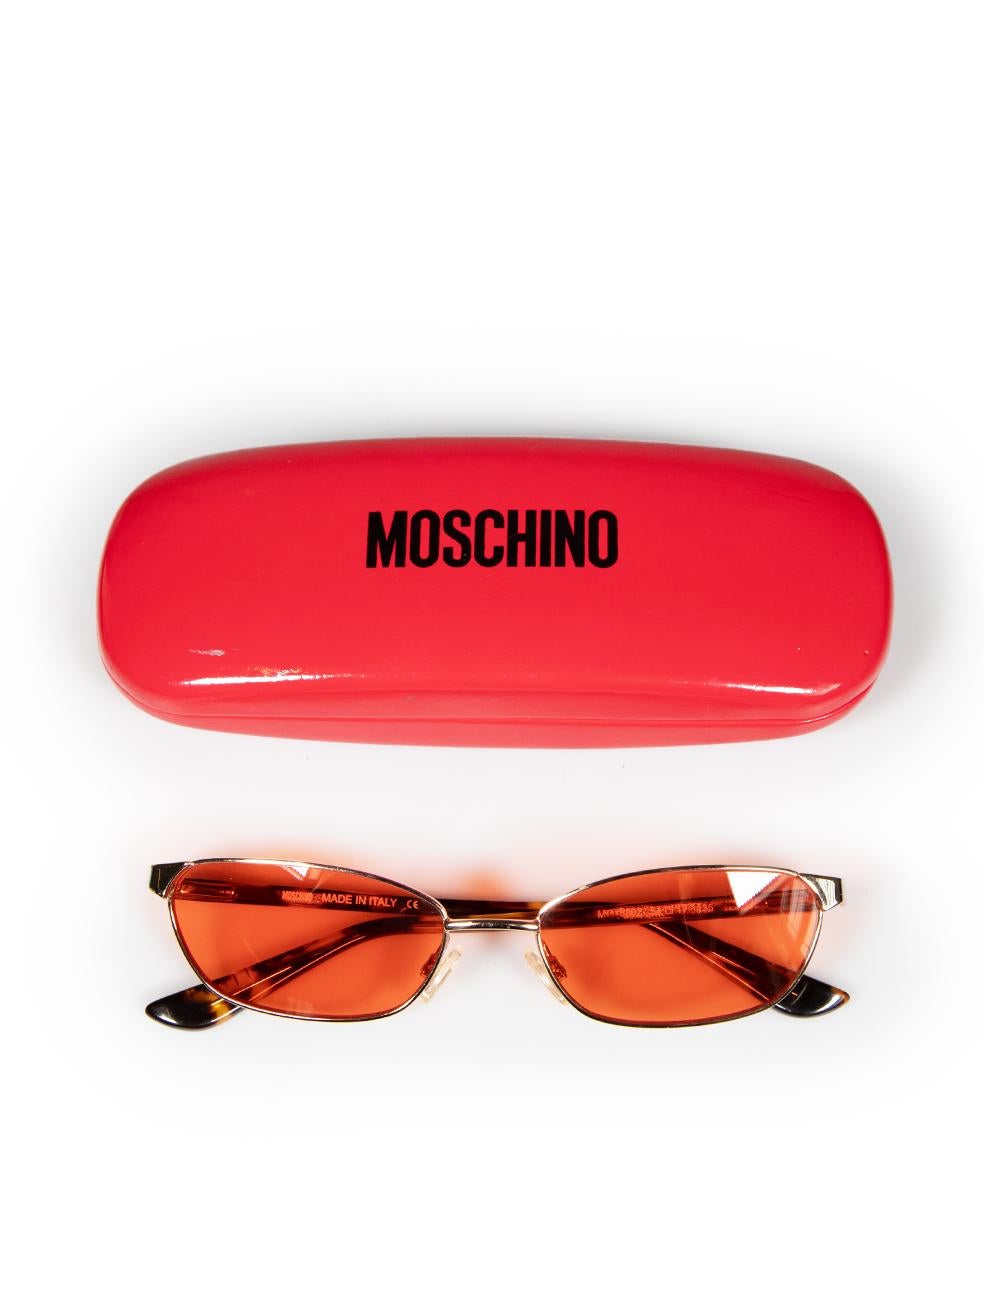 Moschino Red Cat Eye Tinted Sunglasses For Sale 1